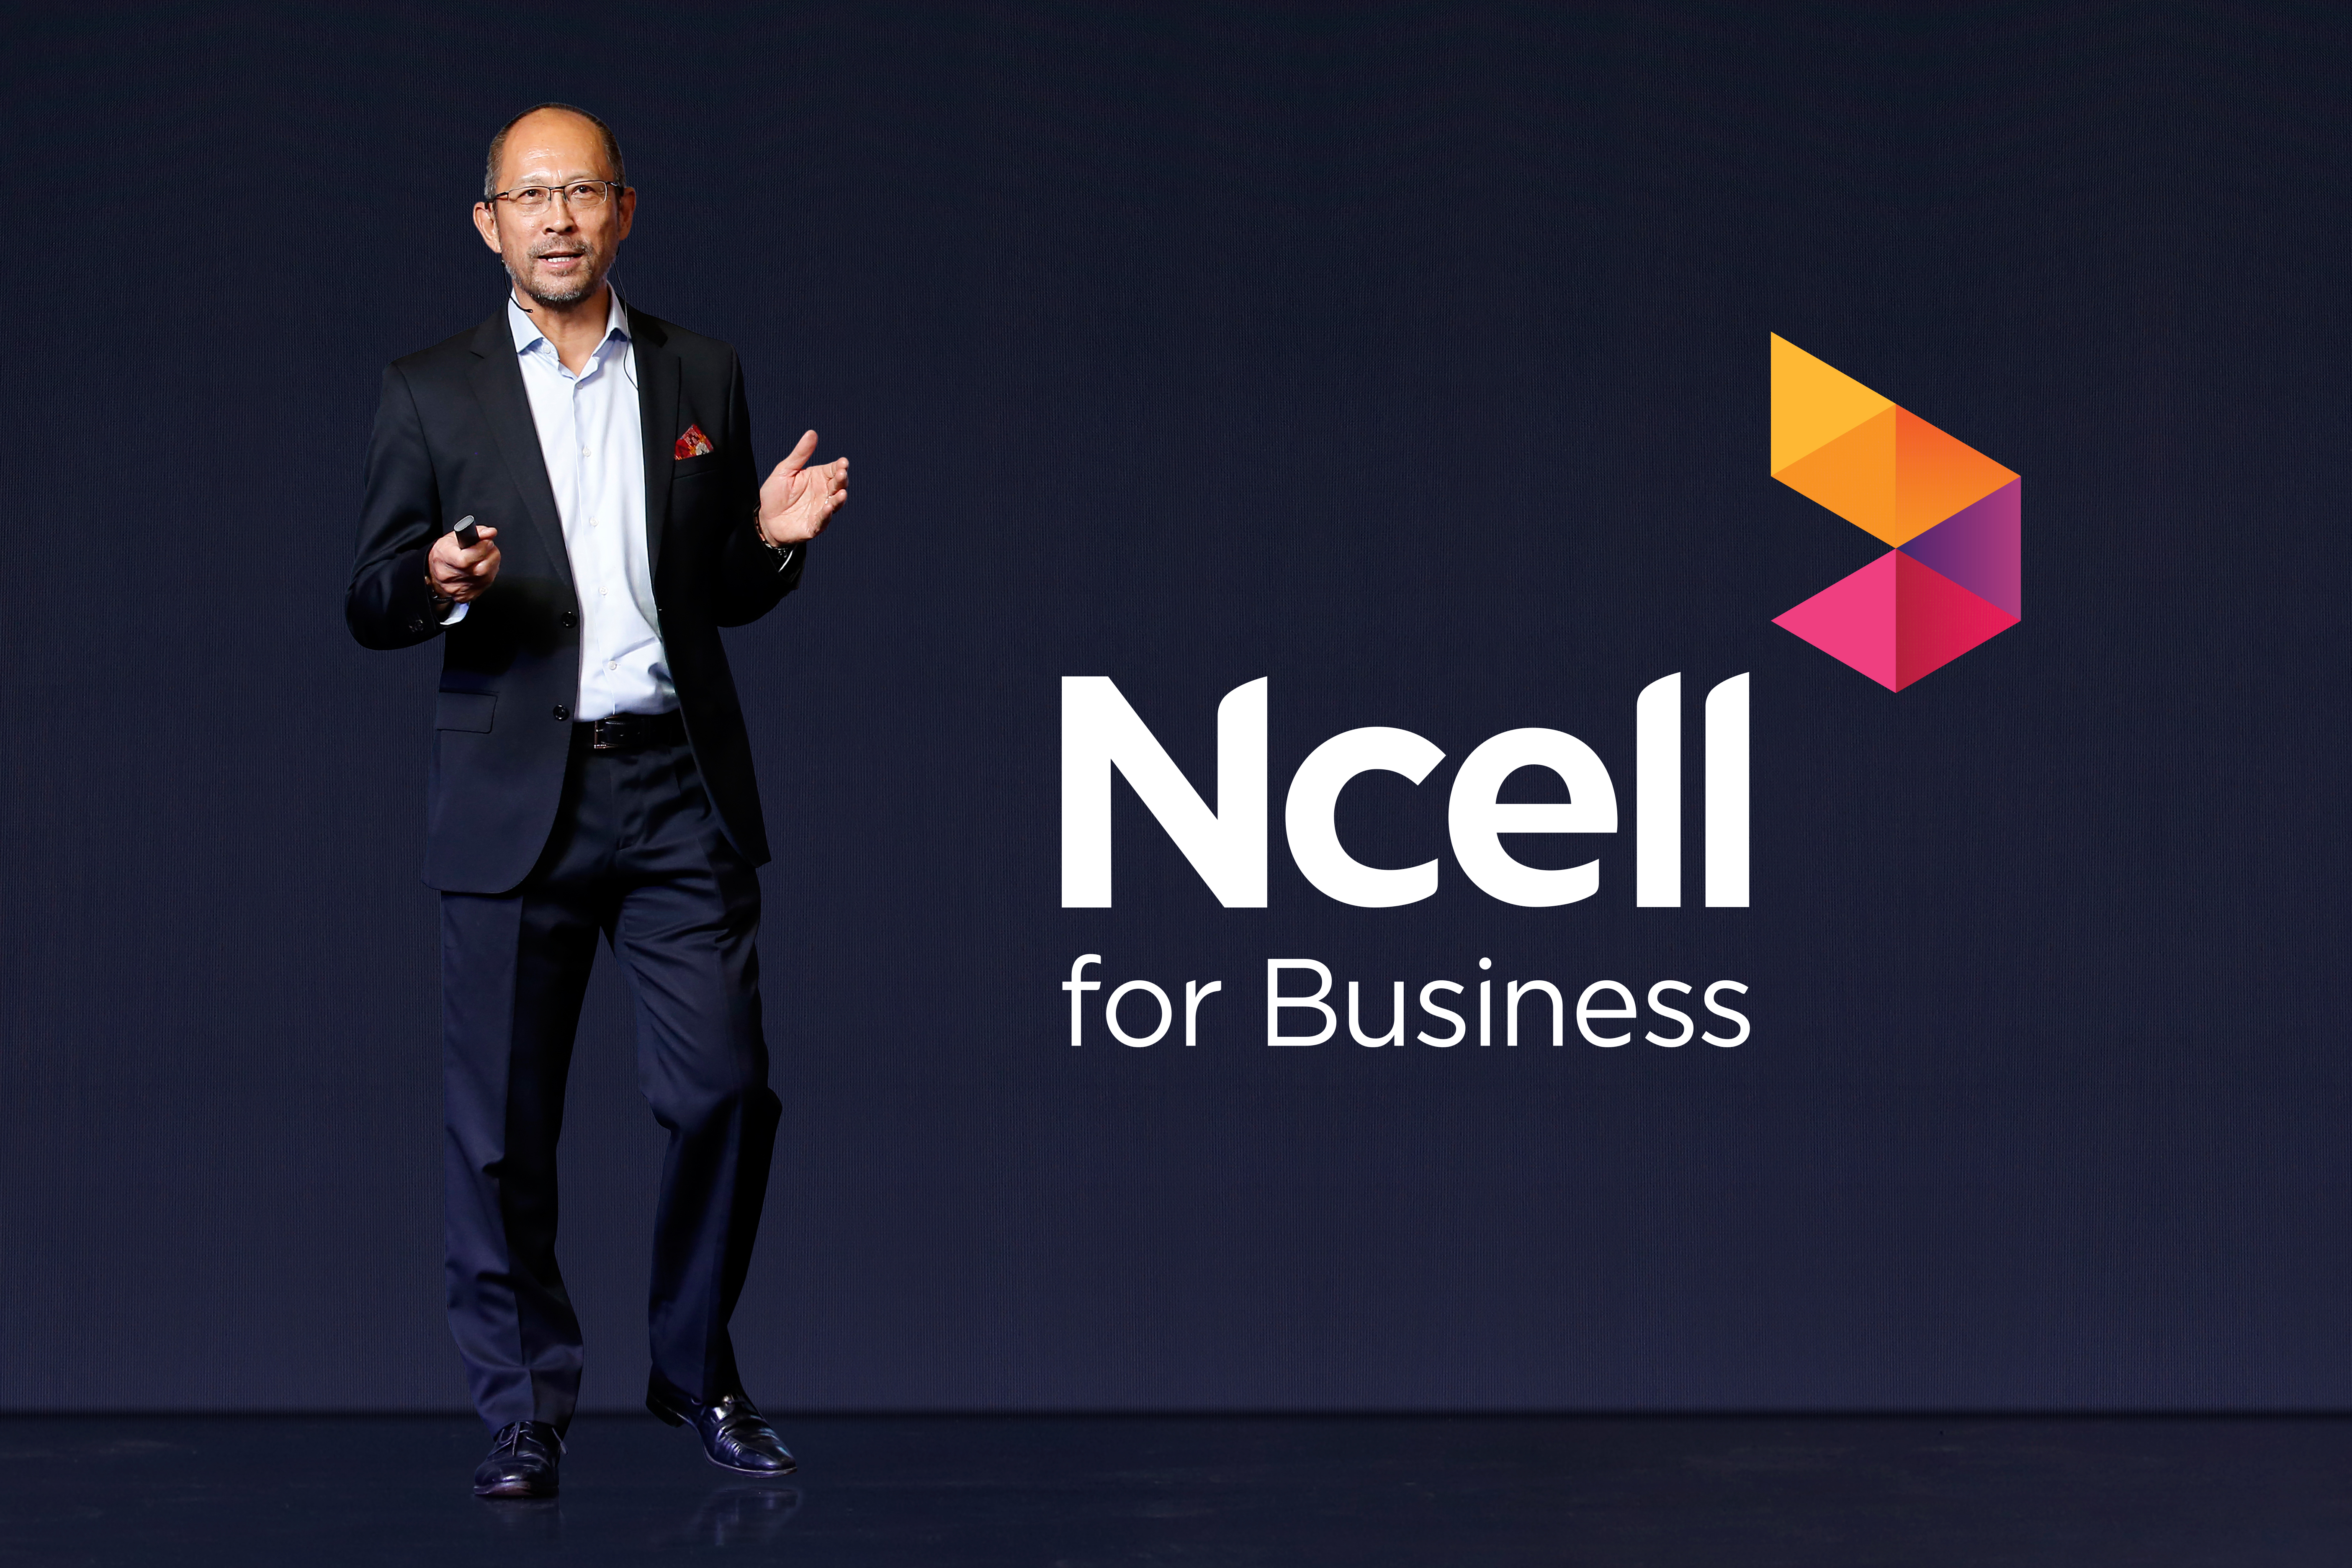 Ncell launches ‘Ncell for Business’ introducing the GAIN ADVANTAGE